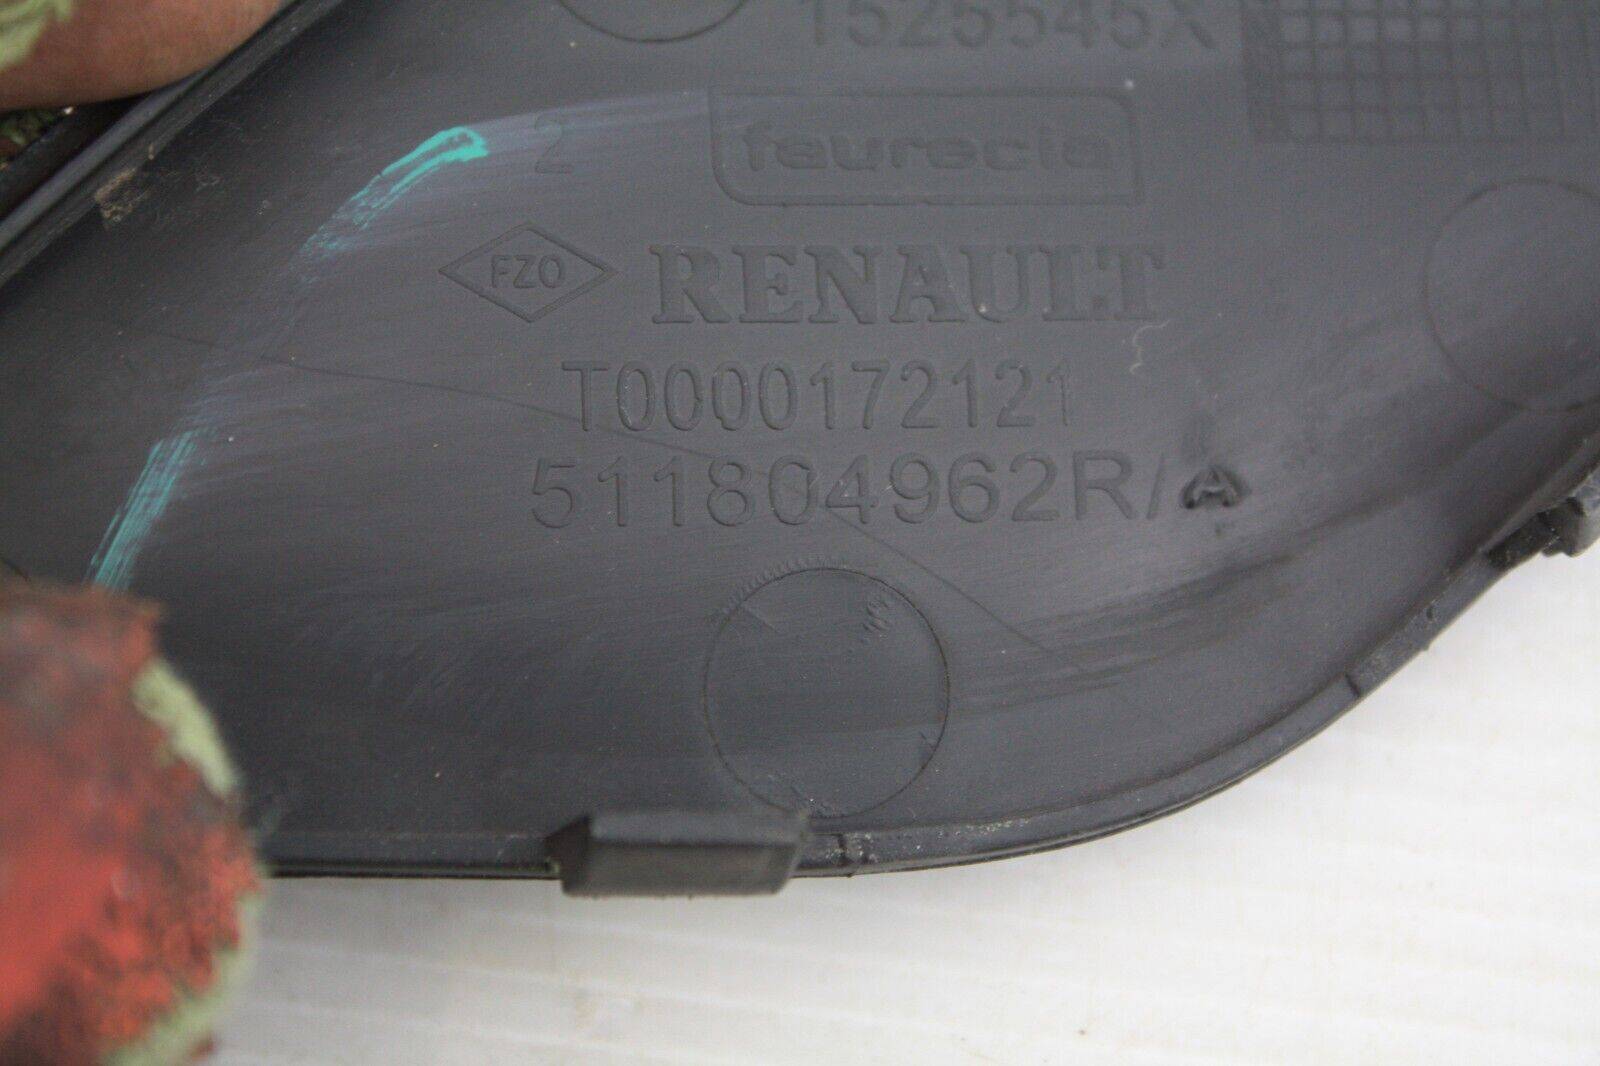 Renault-Kadjar-Front-Bumper-Tow-Cover-2015-to-2018-511804962R-Genuine-175740789030-7